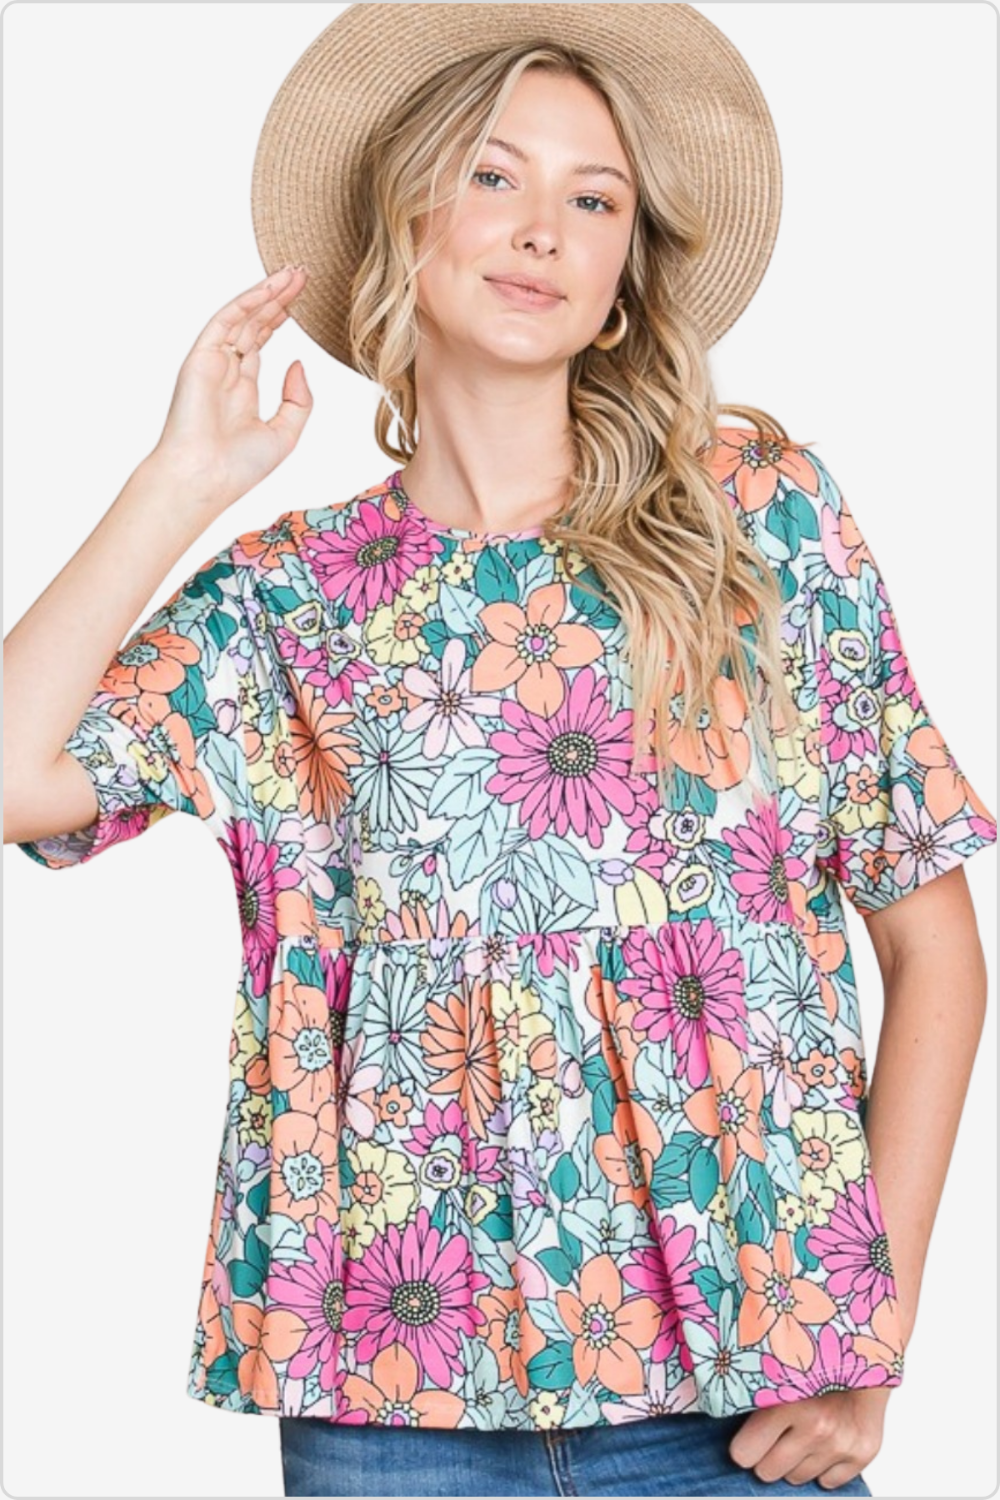 Woman with a straw hat wearing a colorful floral print blouse with short sleeves, styled with classic denim jeans.